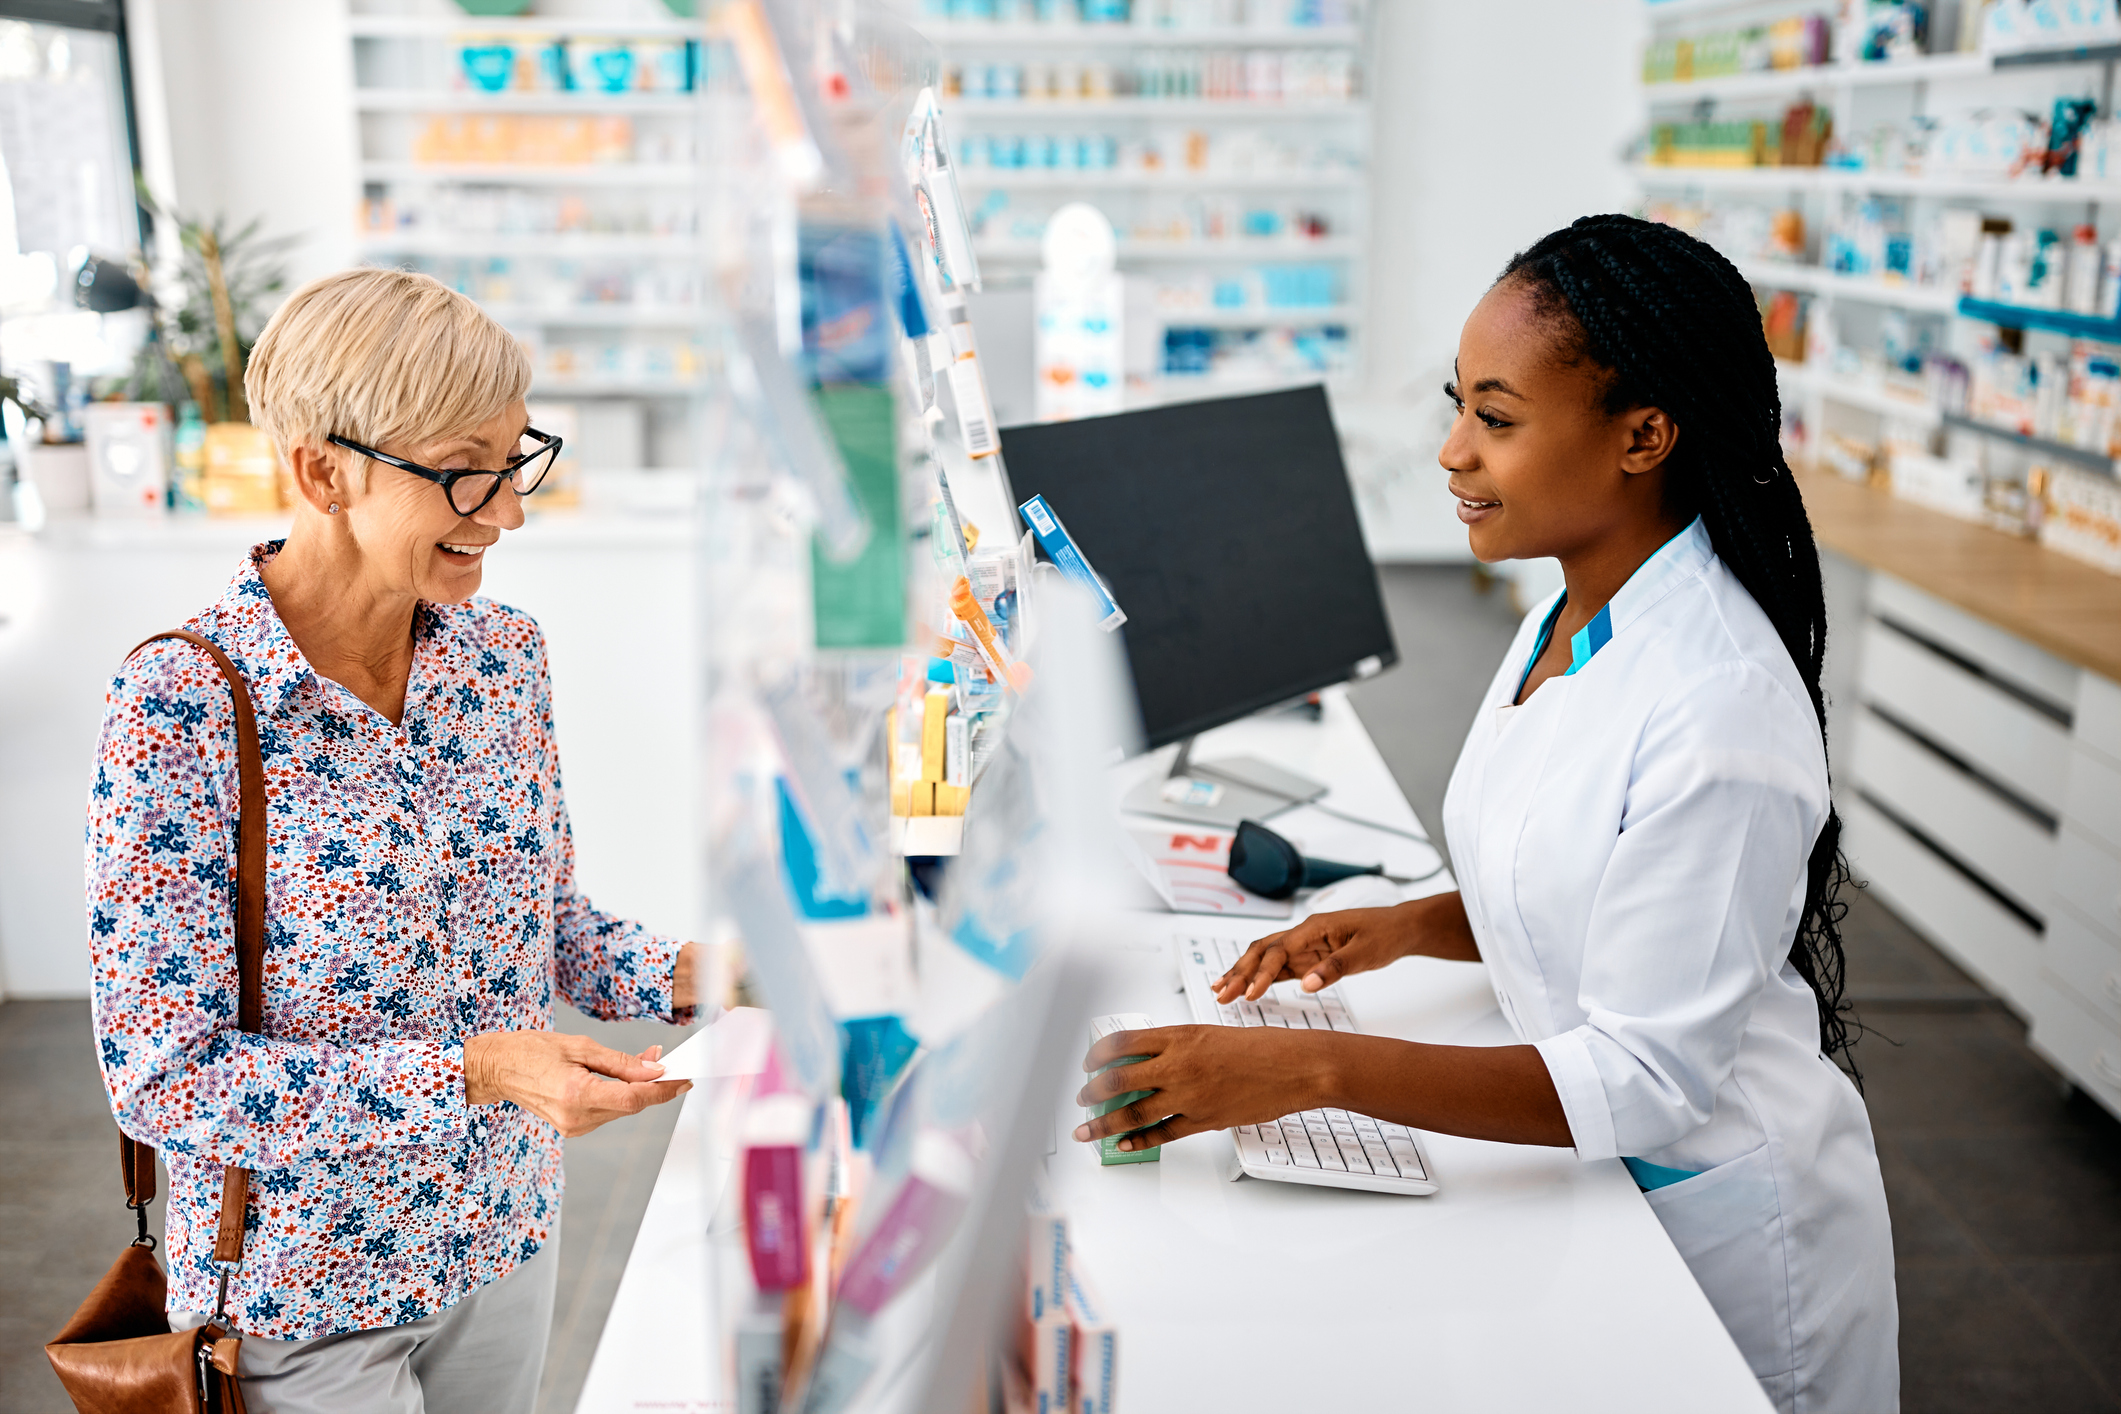 Discover the Best Arlington Pharmacy at Fielder Plaza